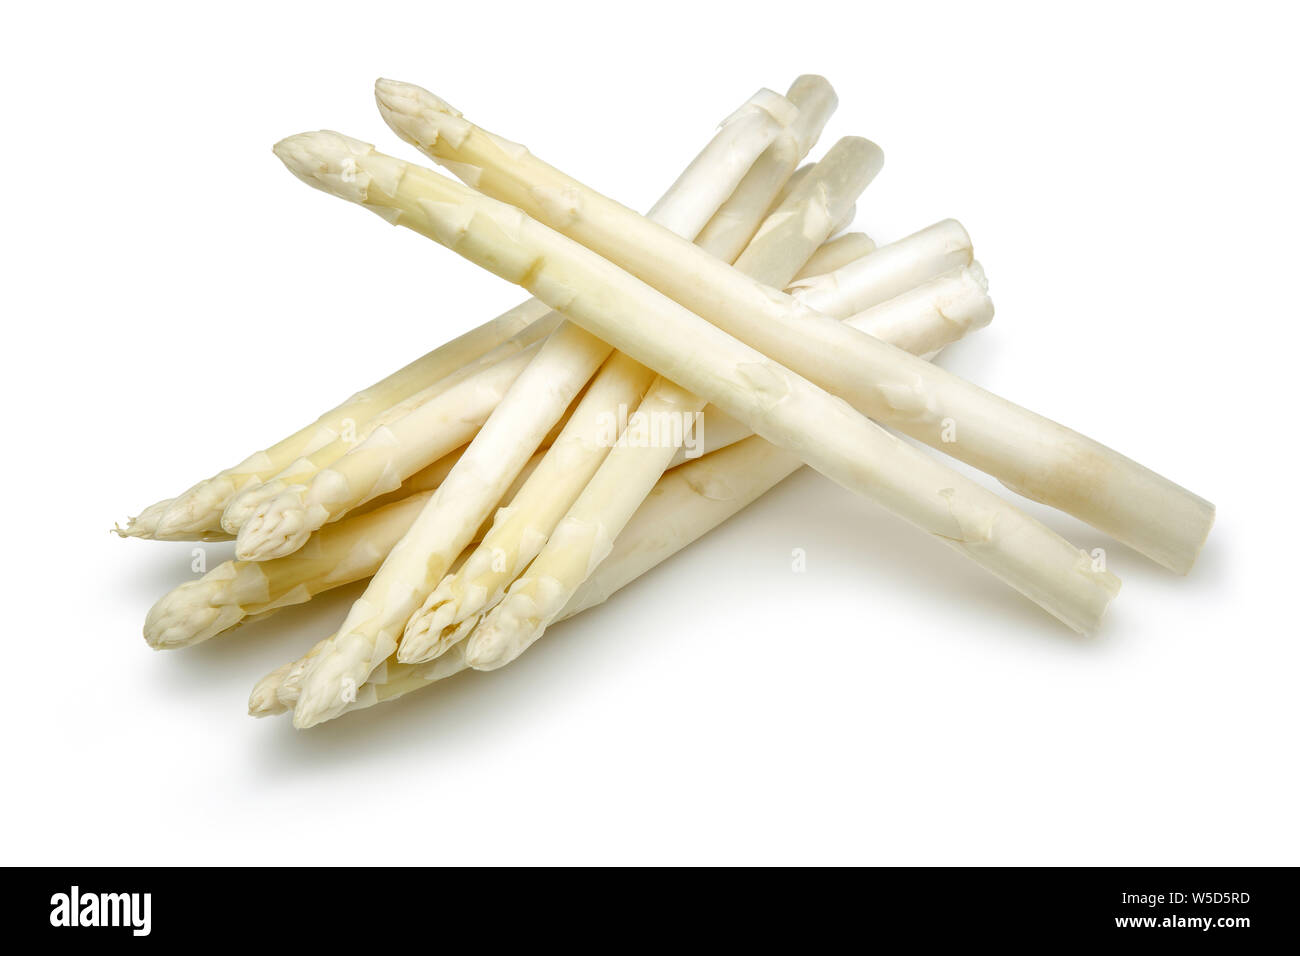 Bunch of white asparagus isolated on white background Stock Photo